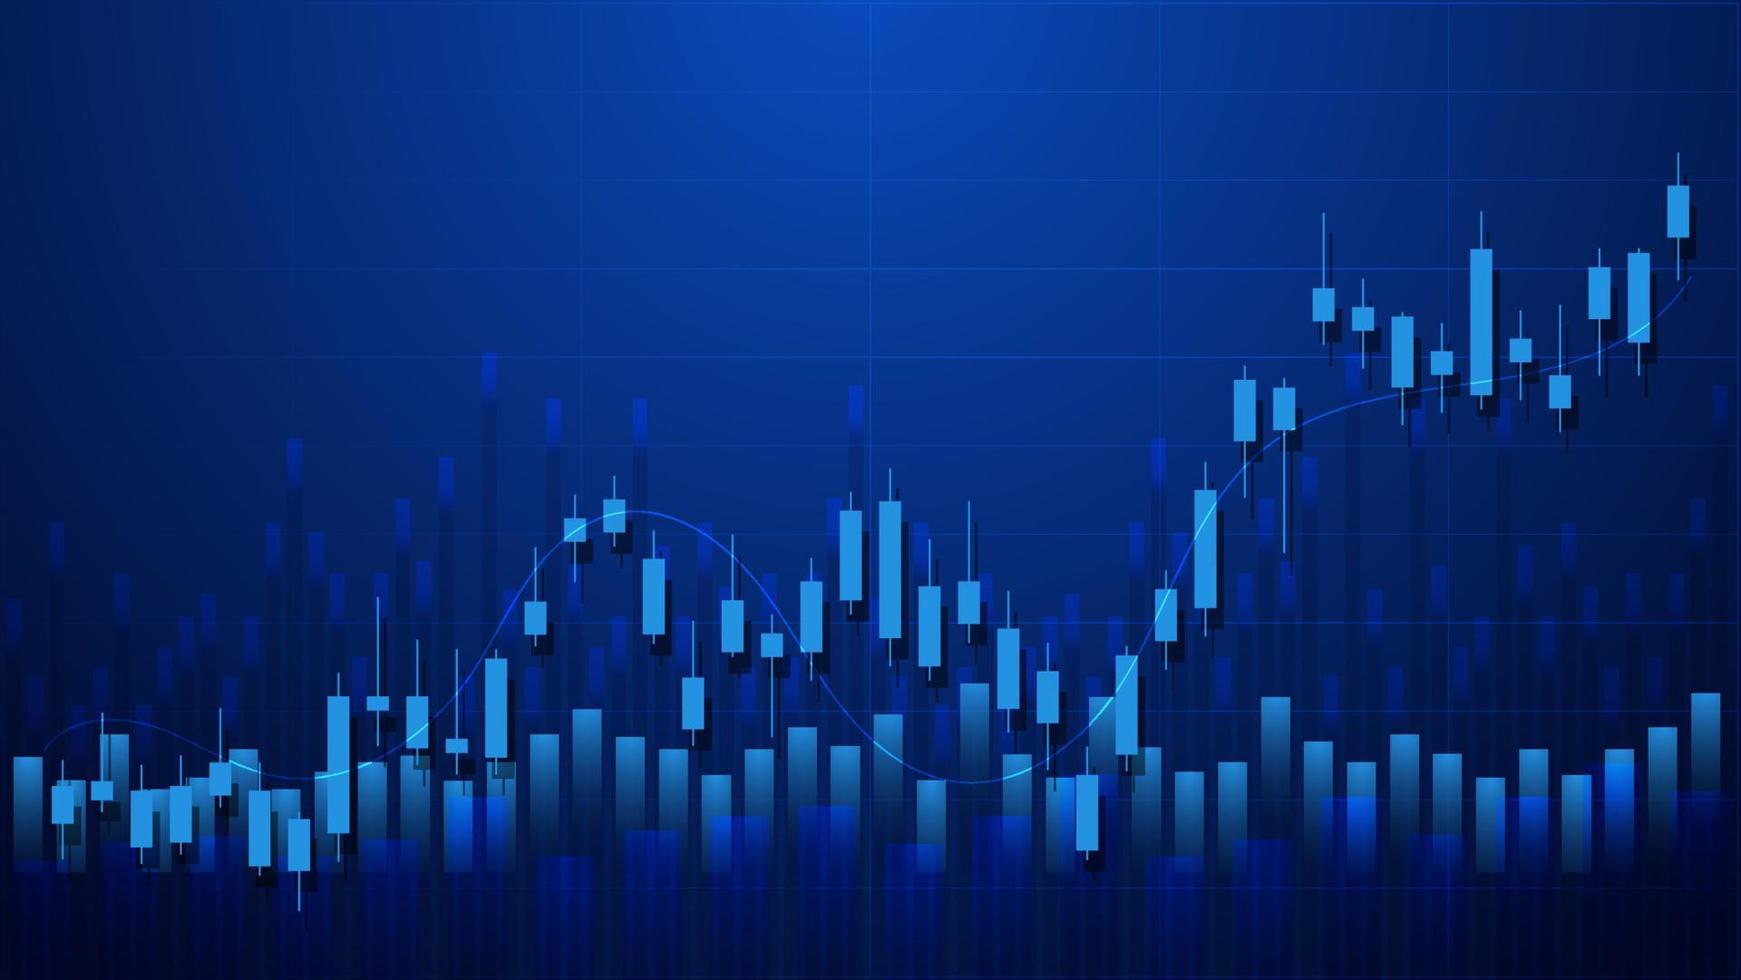 economy situation concept. Financial business statistics with bar graph and candlestick chart show stock market price and currency exchange on blue background vector